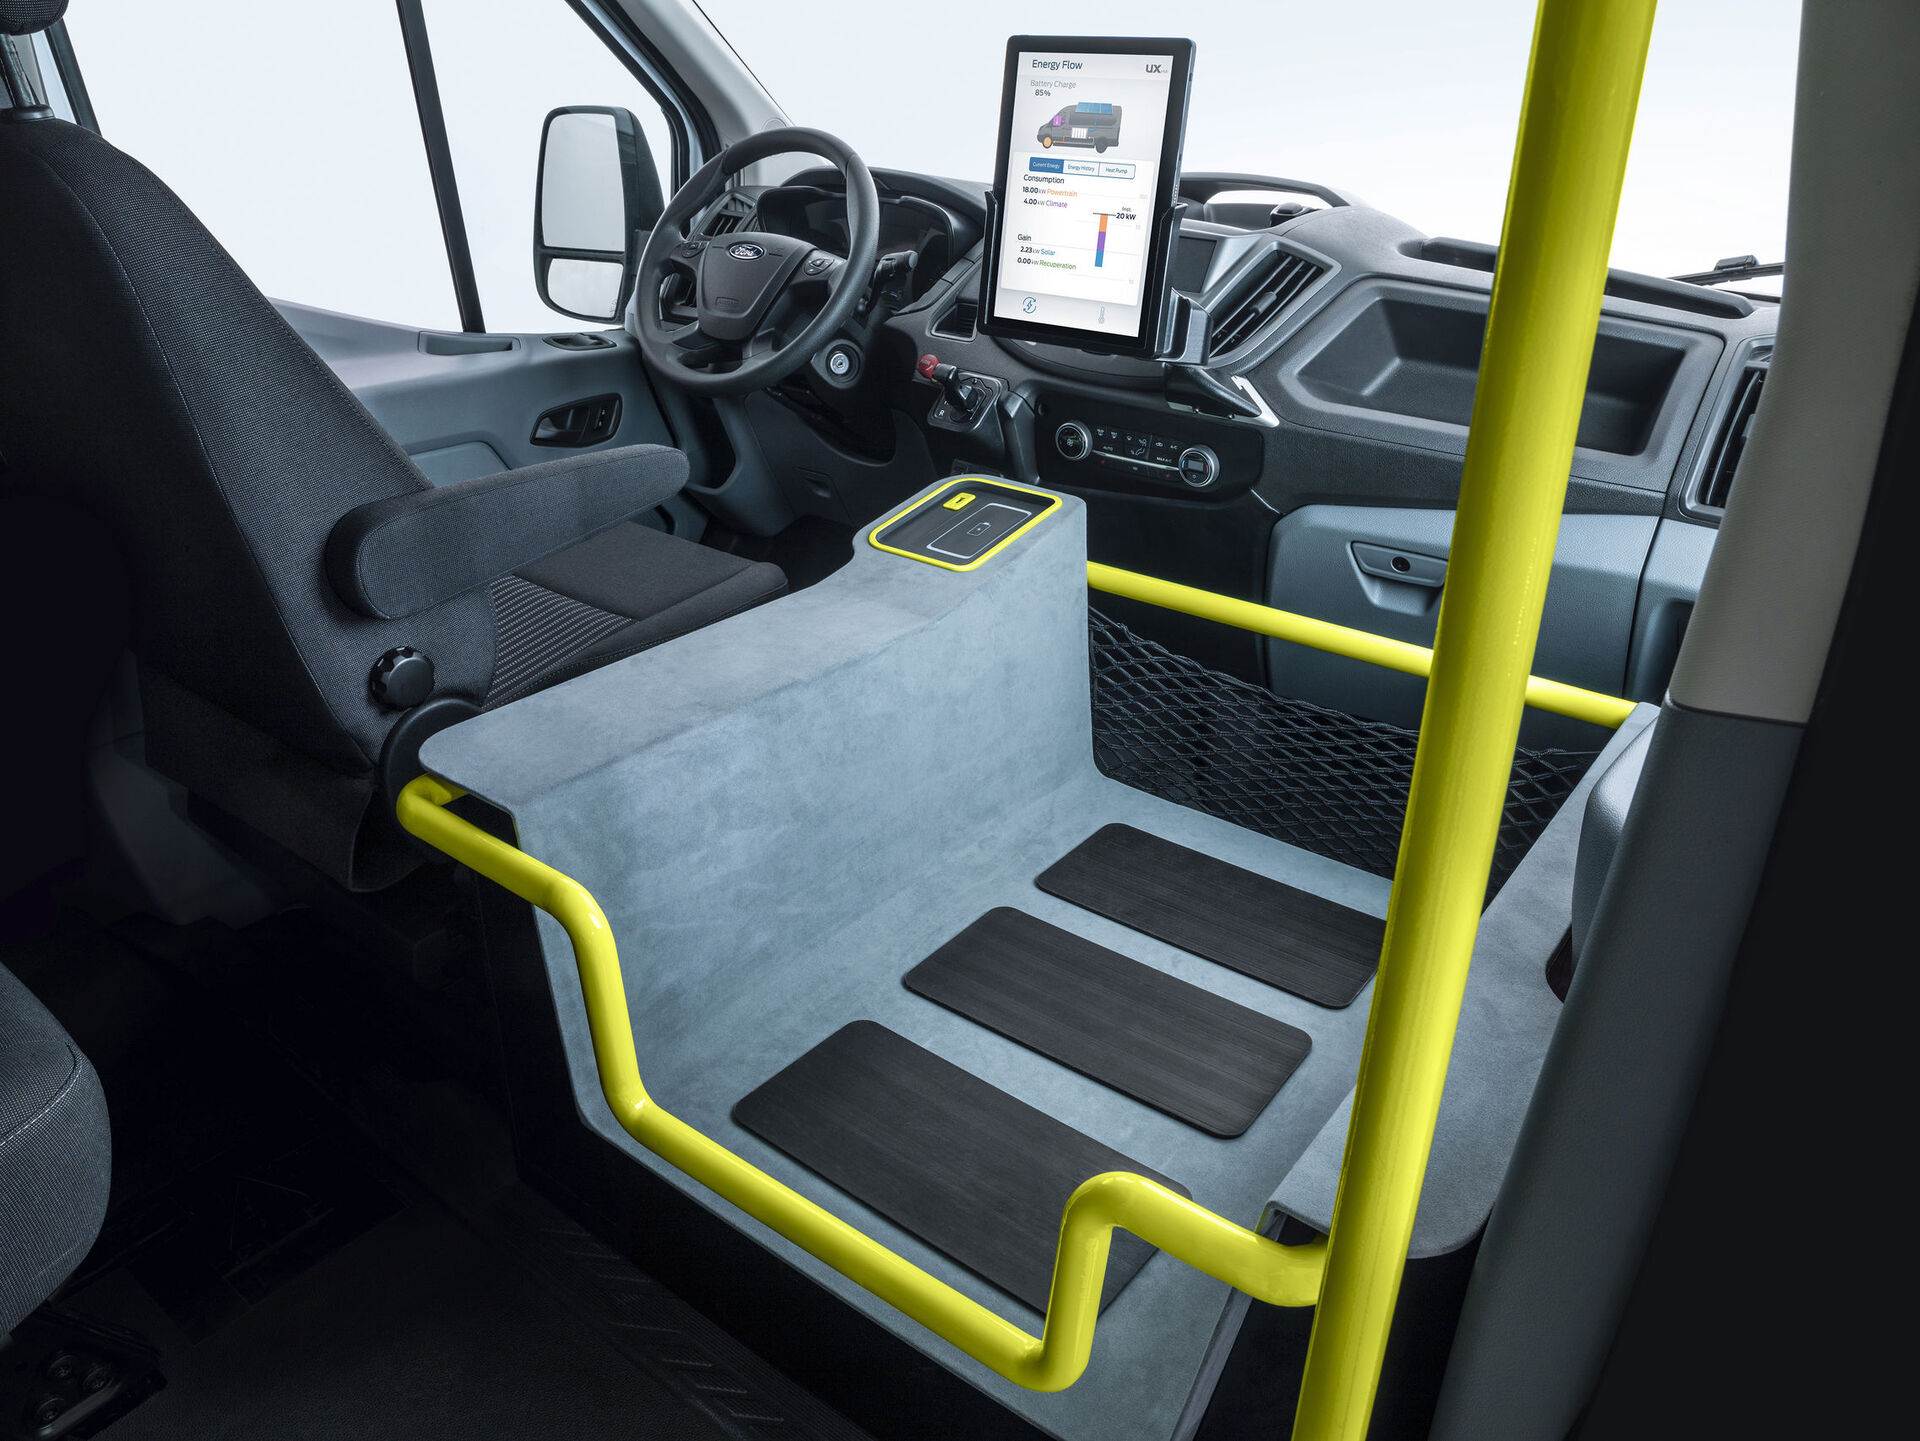 Ford Transit Smart Energy Concept